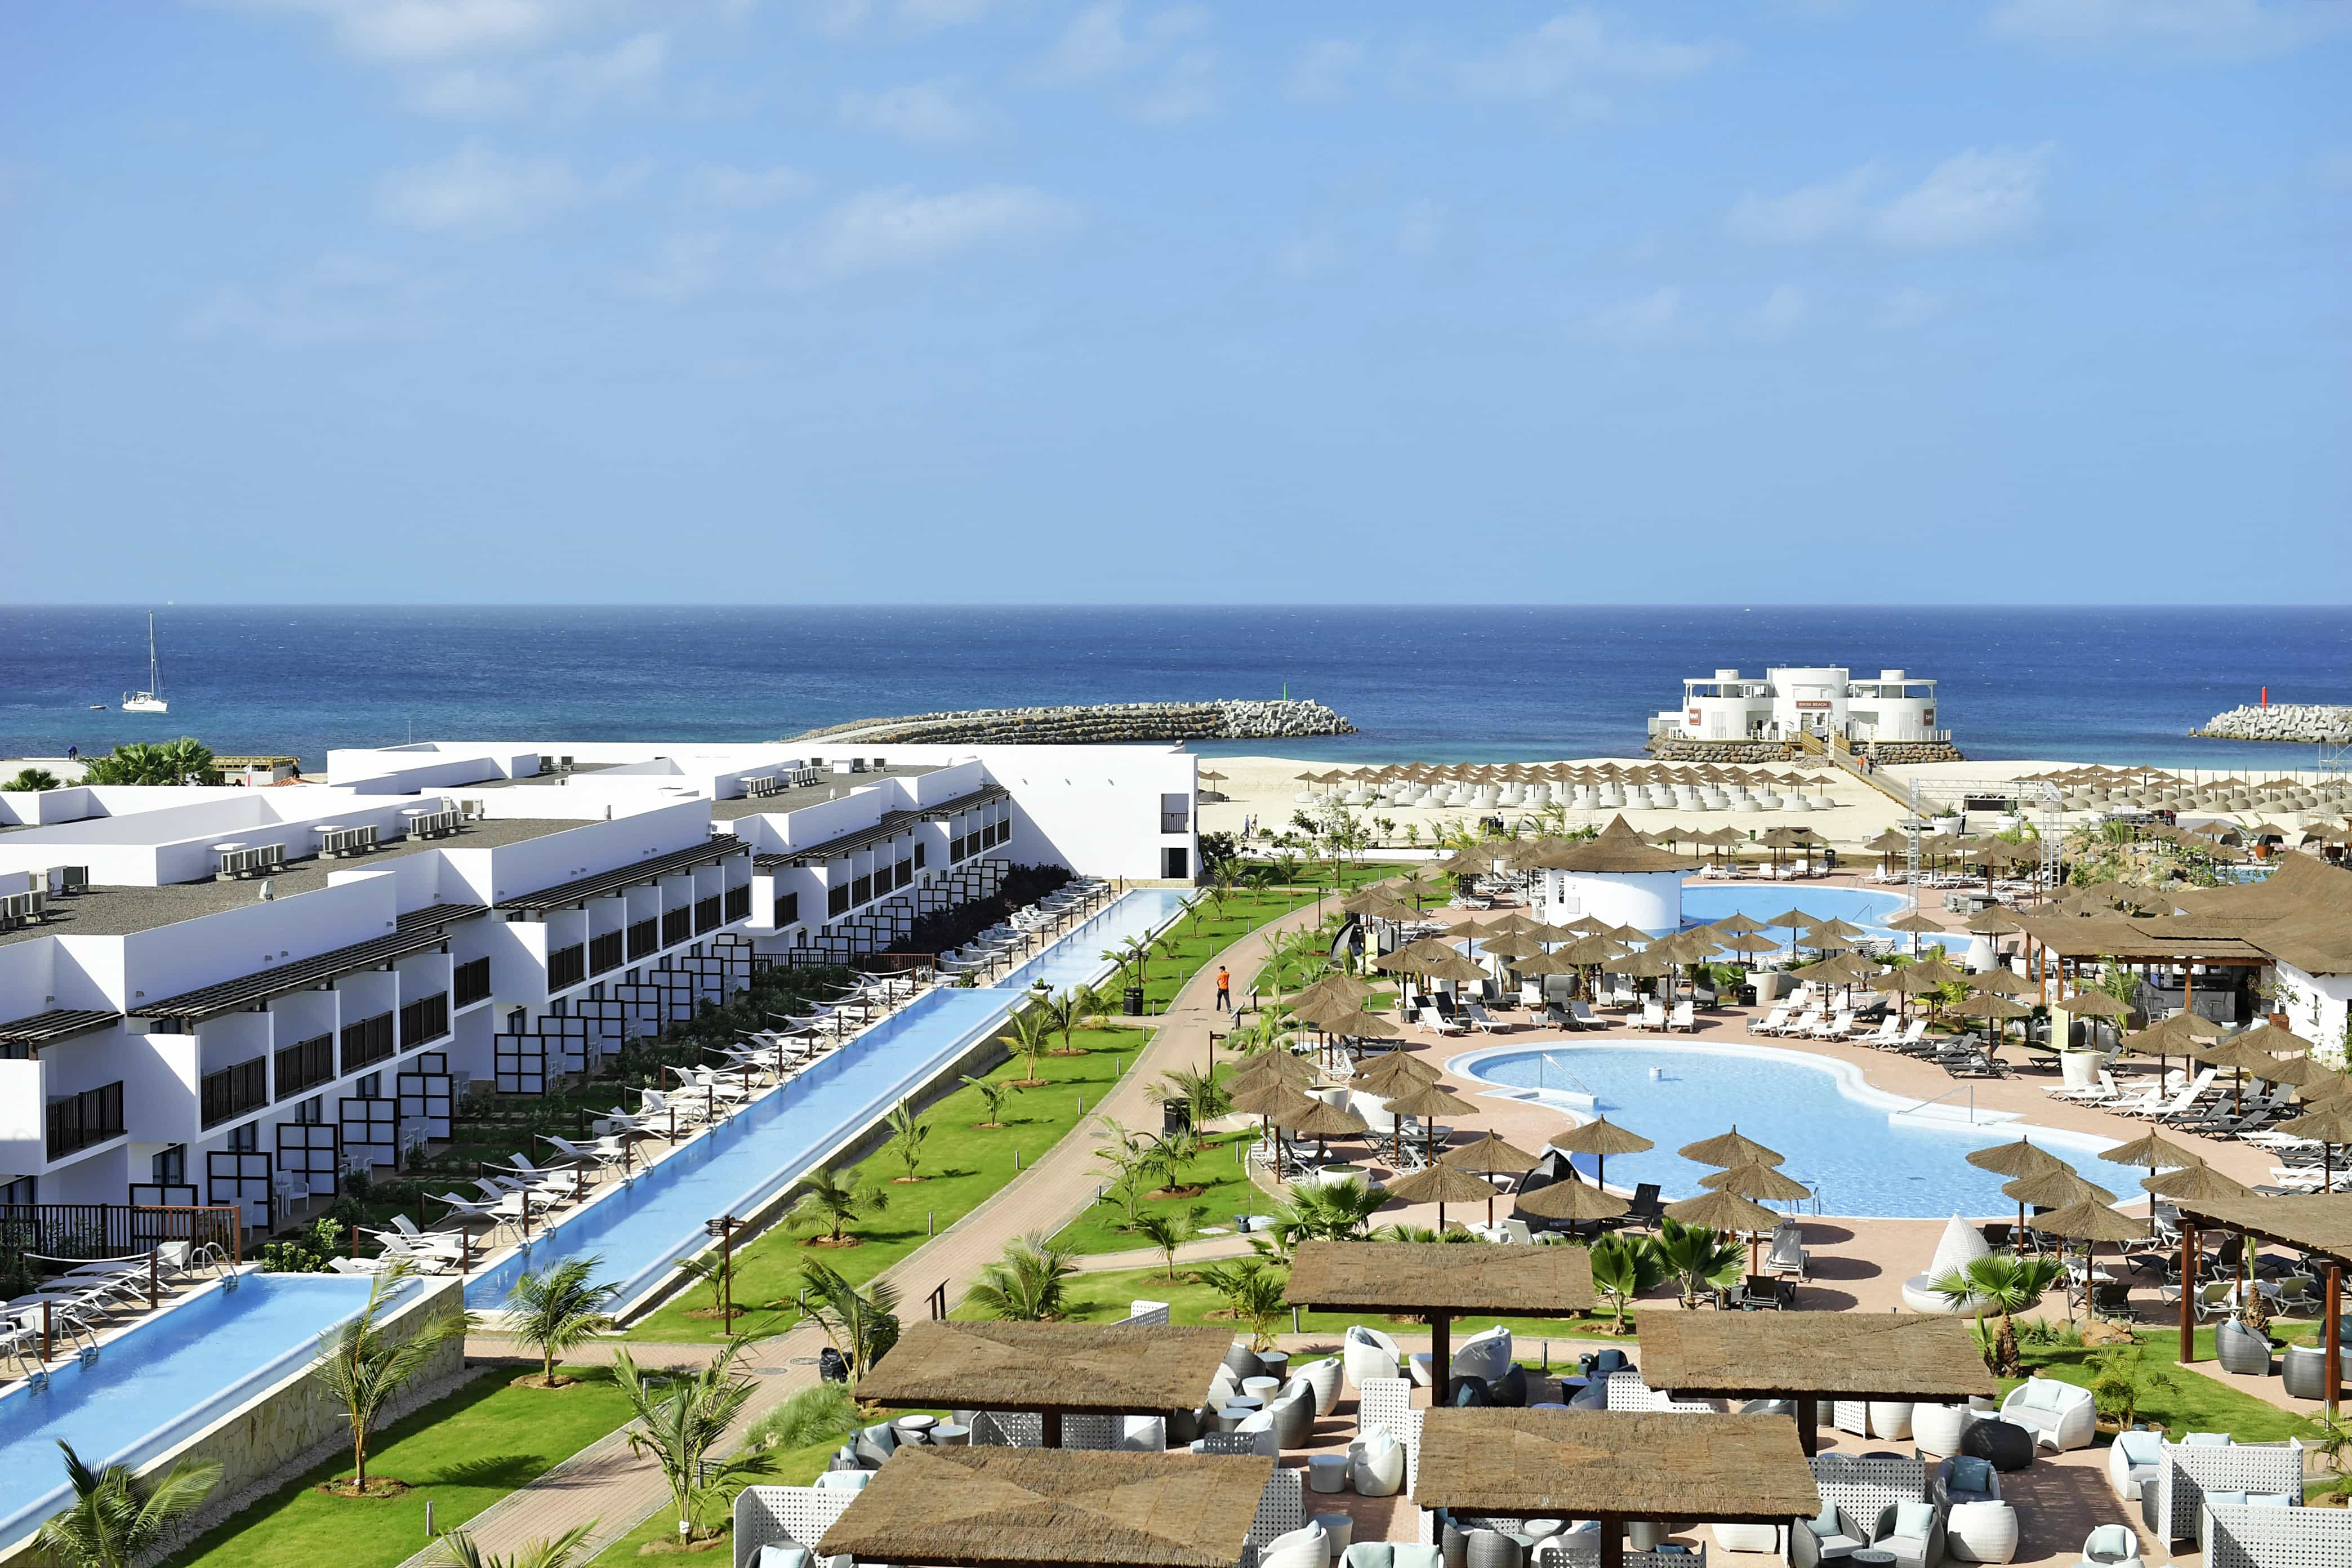 Cape Verde Islands: an up-and-coming destination